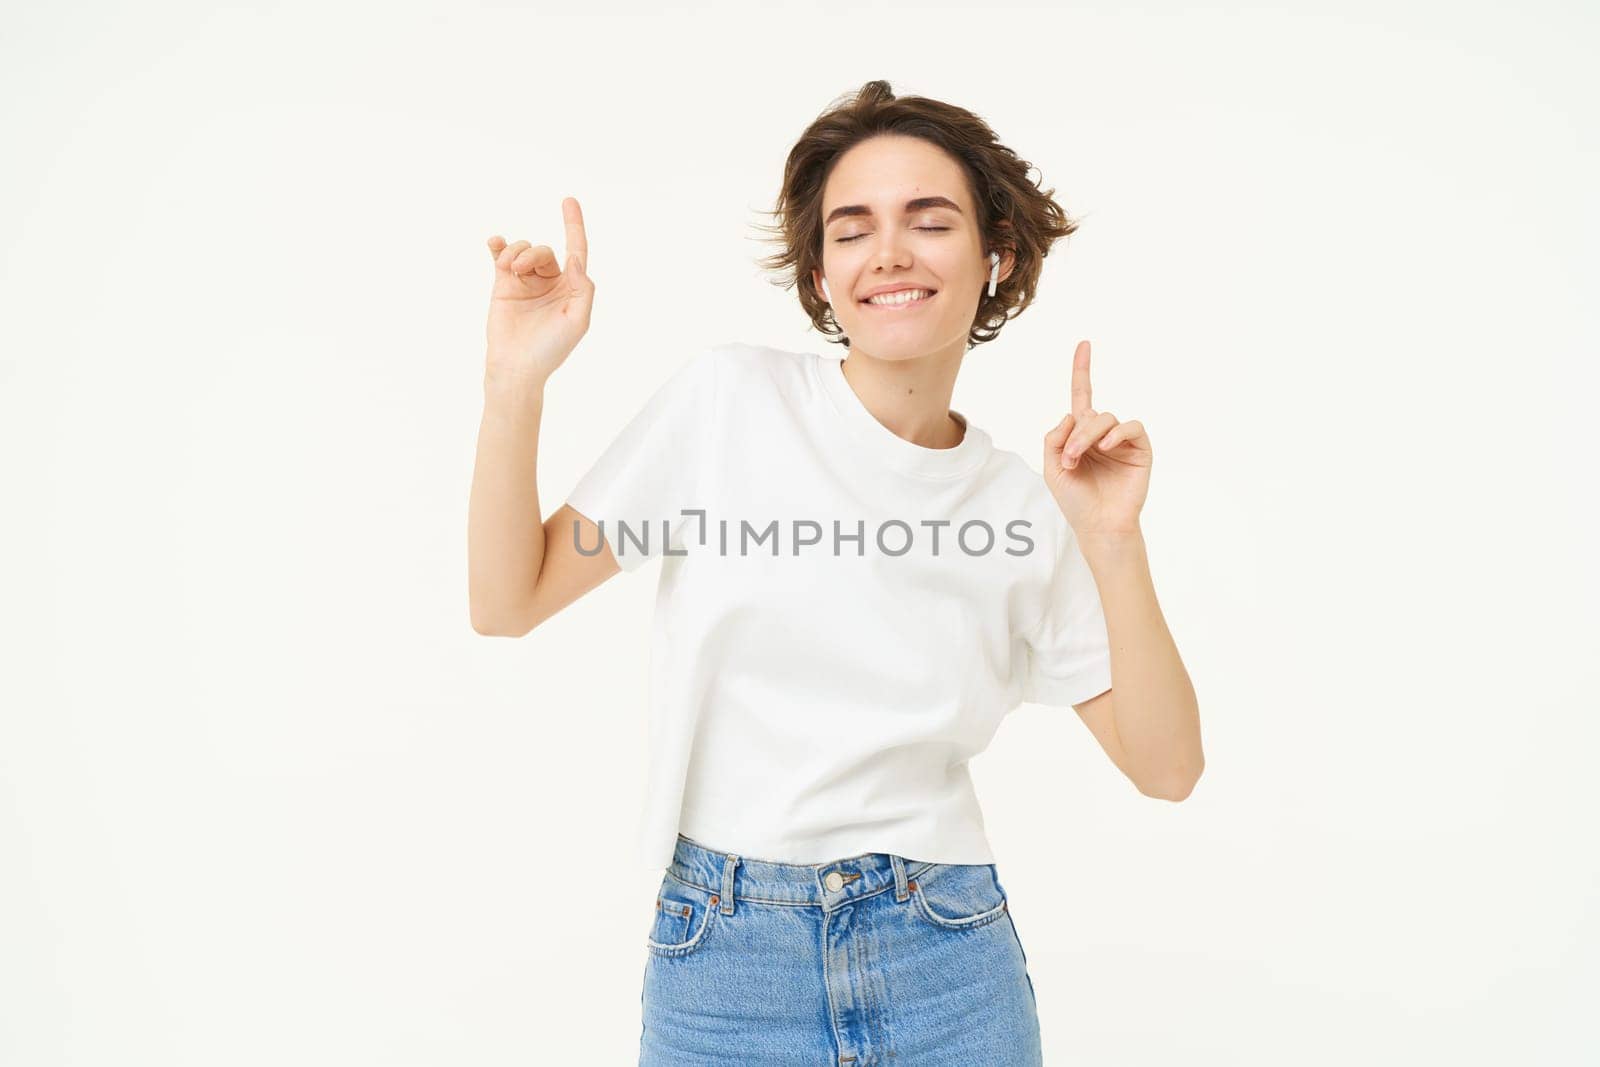 Portrait of happy smiling woman in wireless earphones, dancing and listening to music, enjoying her favourite song, posing over white background.